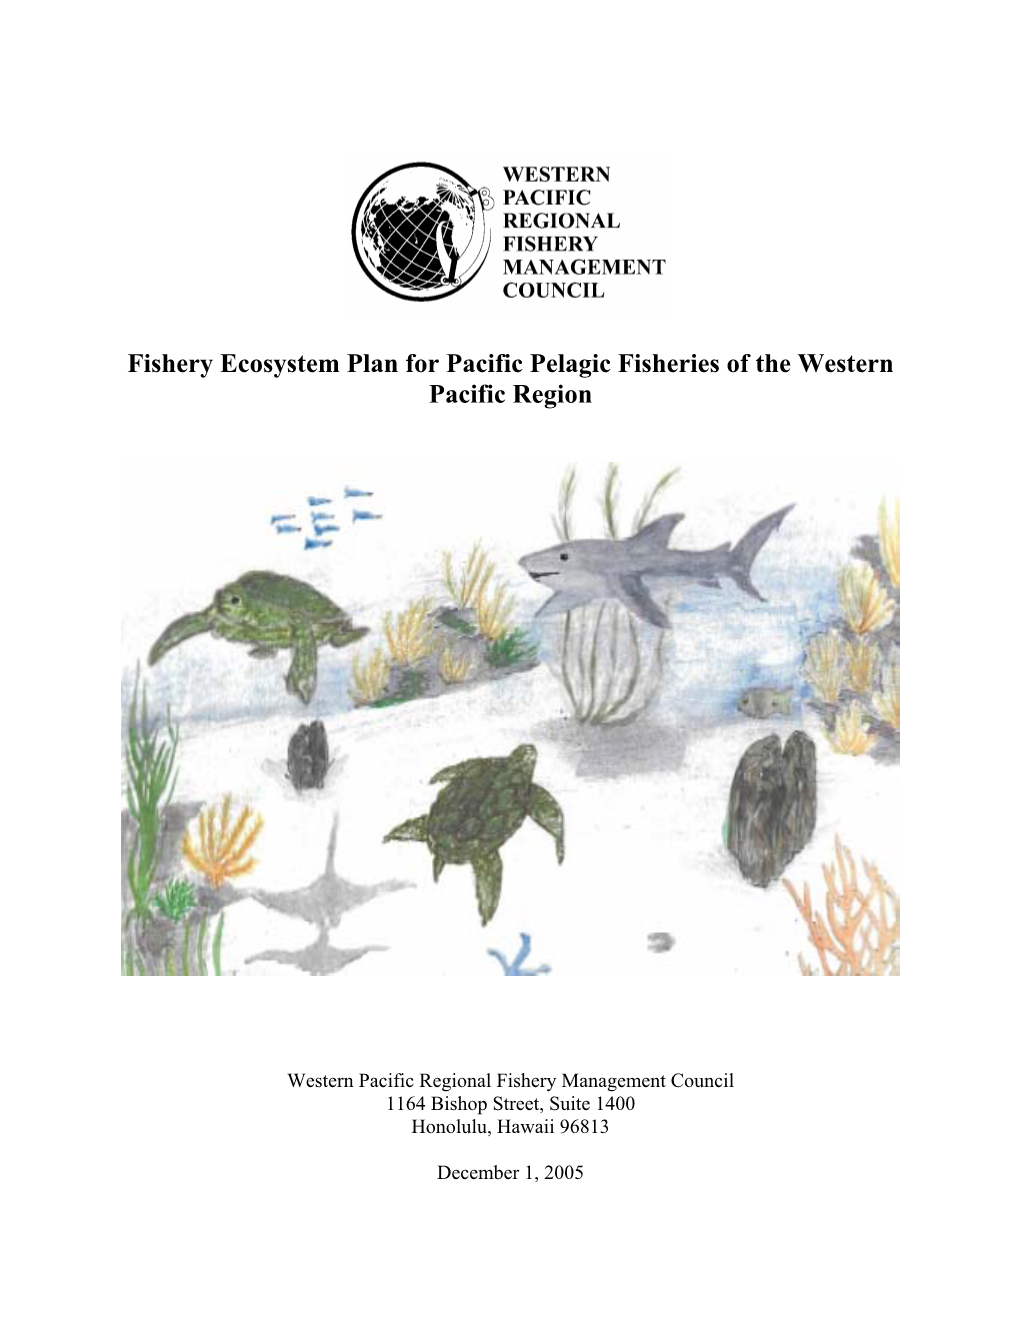 Fishery Ecosystem Plan for Pacific Pelagic Fisheries of the Western Pacific Region